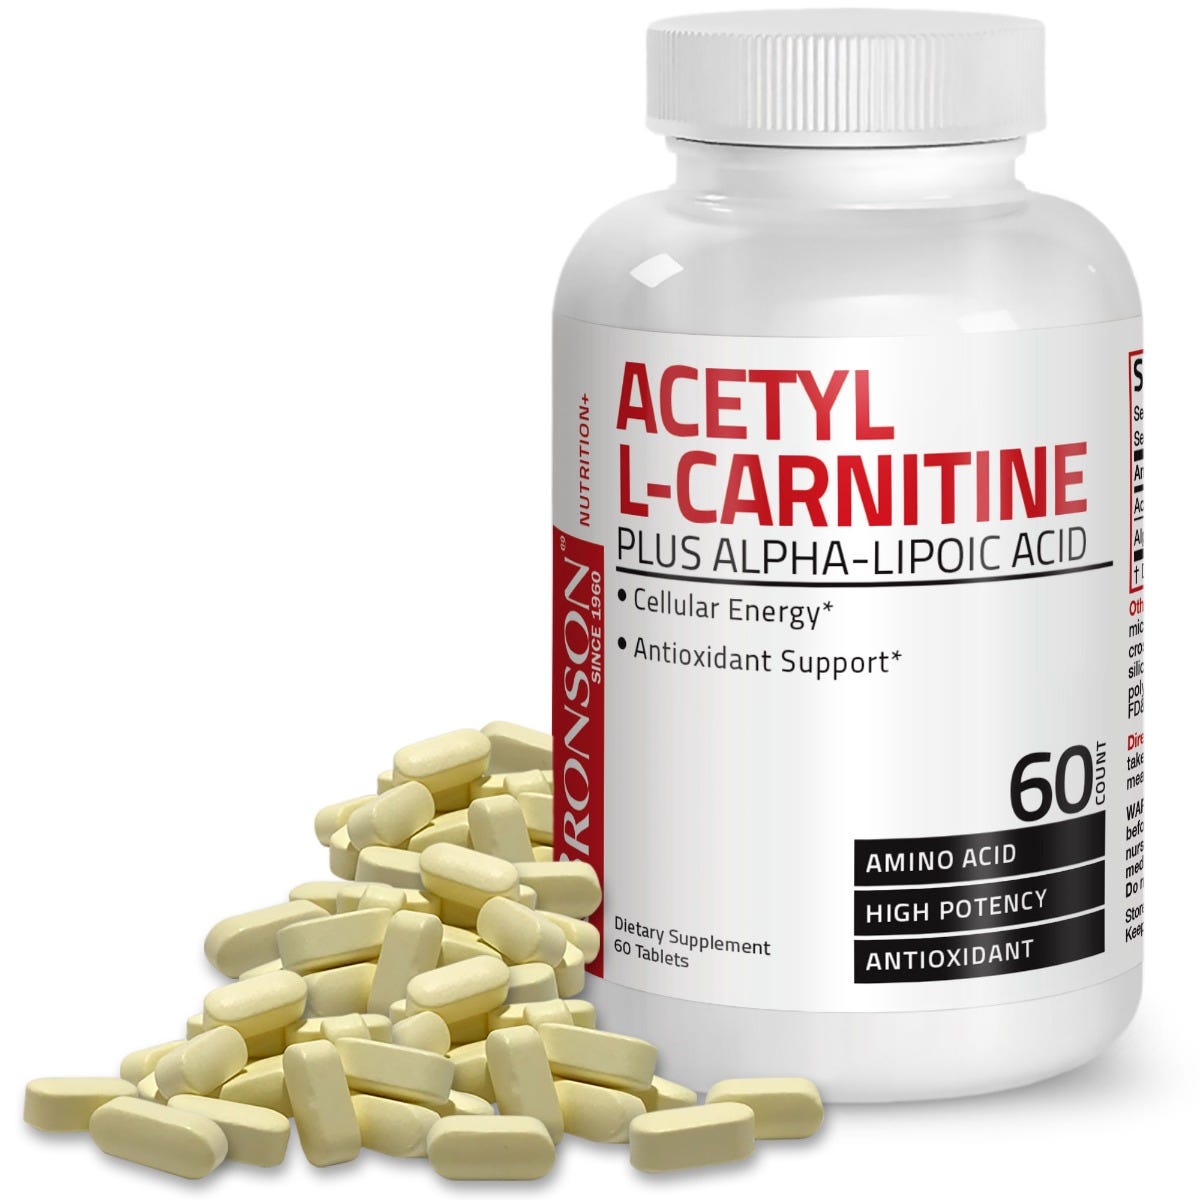 Acetyl L-Carnitine with Alpha-Lipoic Acid view 3 of 6